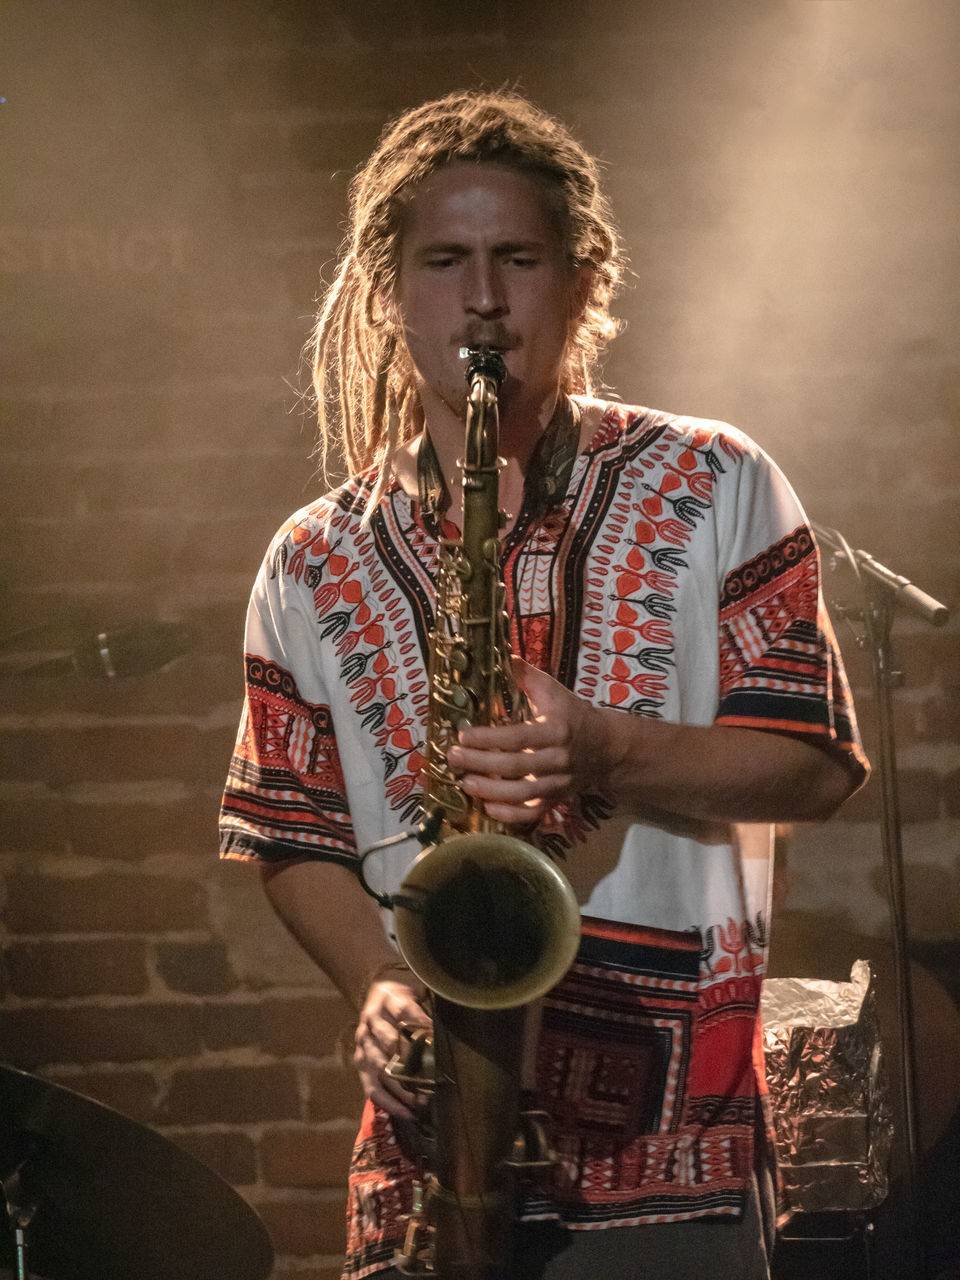 holding, one person, young adult, real people, musical instrument, music, casual clothing, front view, young men, wind instrument, performance, musician, arts culture and entertainment, indoors, standing, lifestyles, skill, three quarter length, saxophone, trumpet